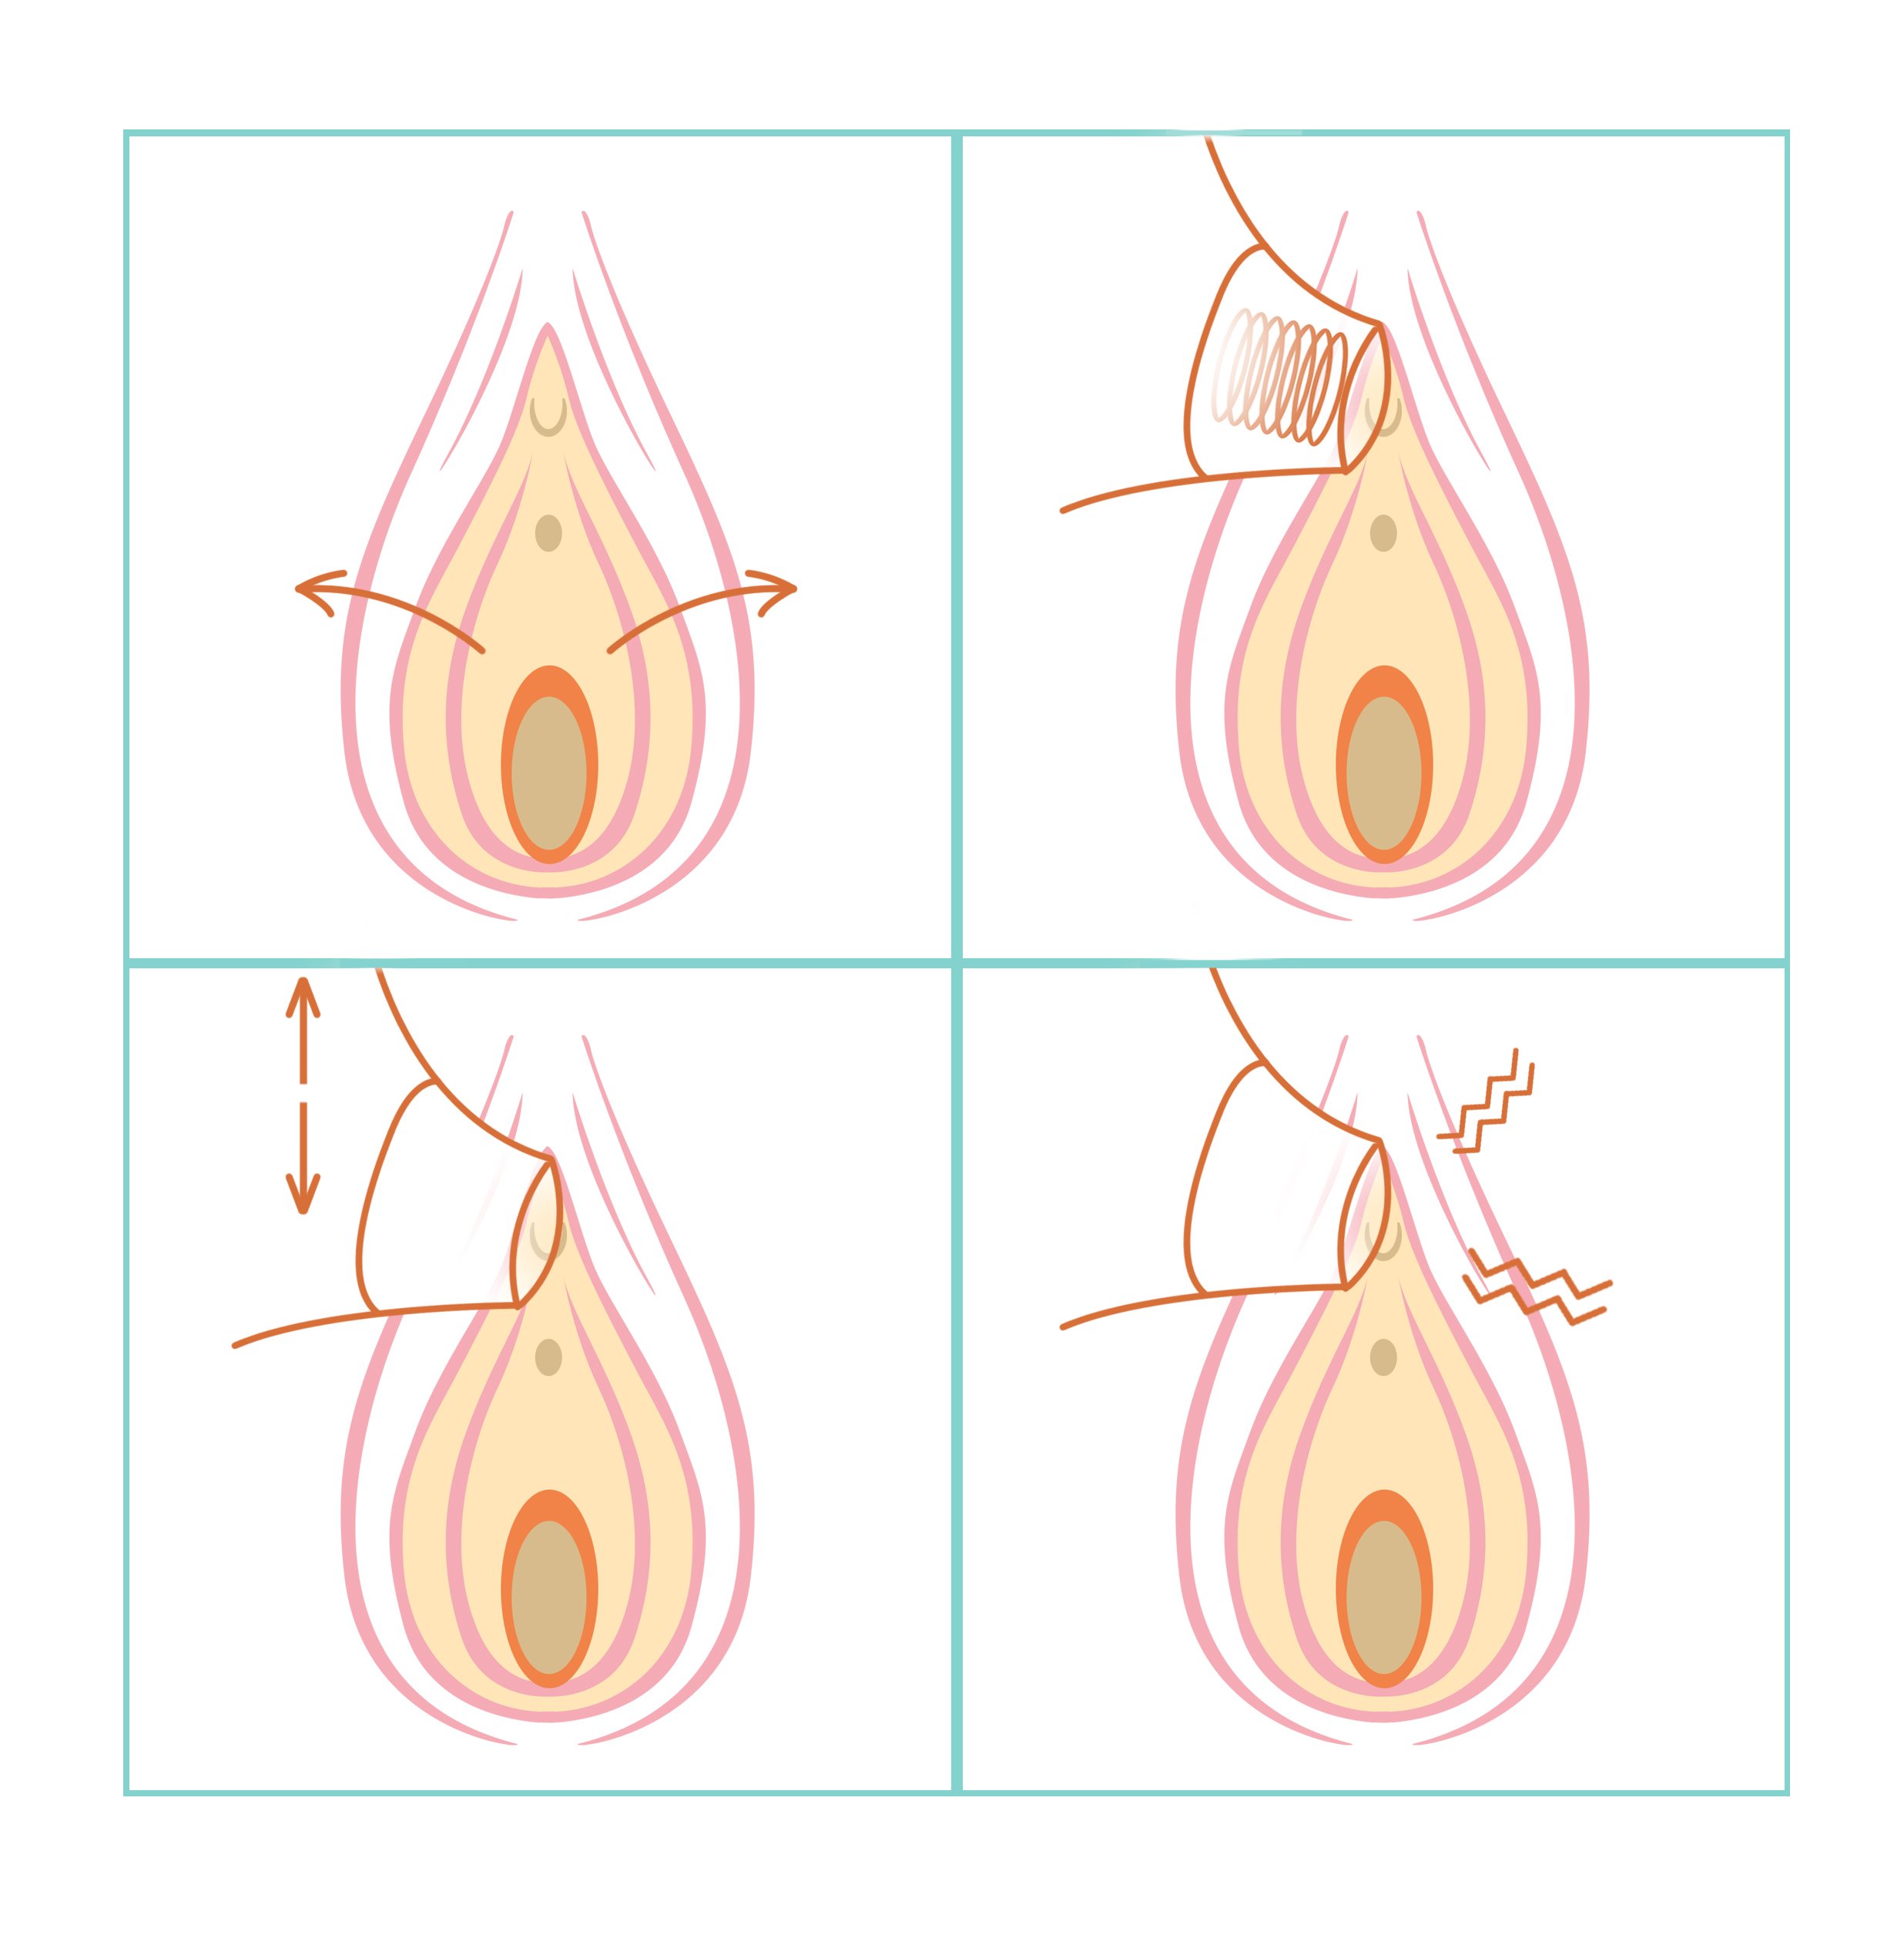 A four-panel diagram showing a suction sex toy operating on a vulva. In the first panel, arrows point outward from the vulva's lips to indicate spreading legs. In the second panel, the a suction toy is applied to the clitoris with a spiral inside of it. In the third panel, arrows point upward and downward from the suction toy. In the fourth panel, squiggly lines emerge from the head of the suction toy to indicate vibrations. 